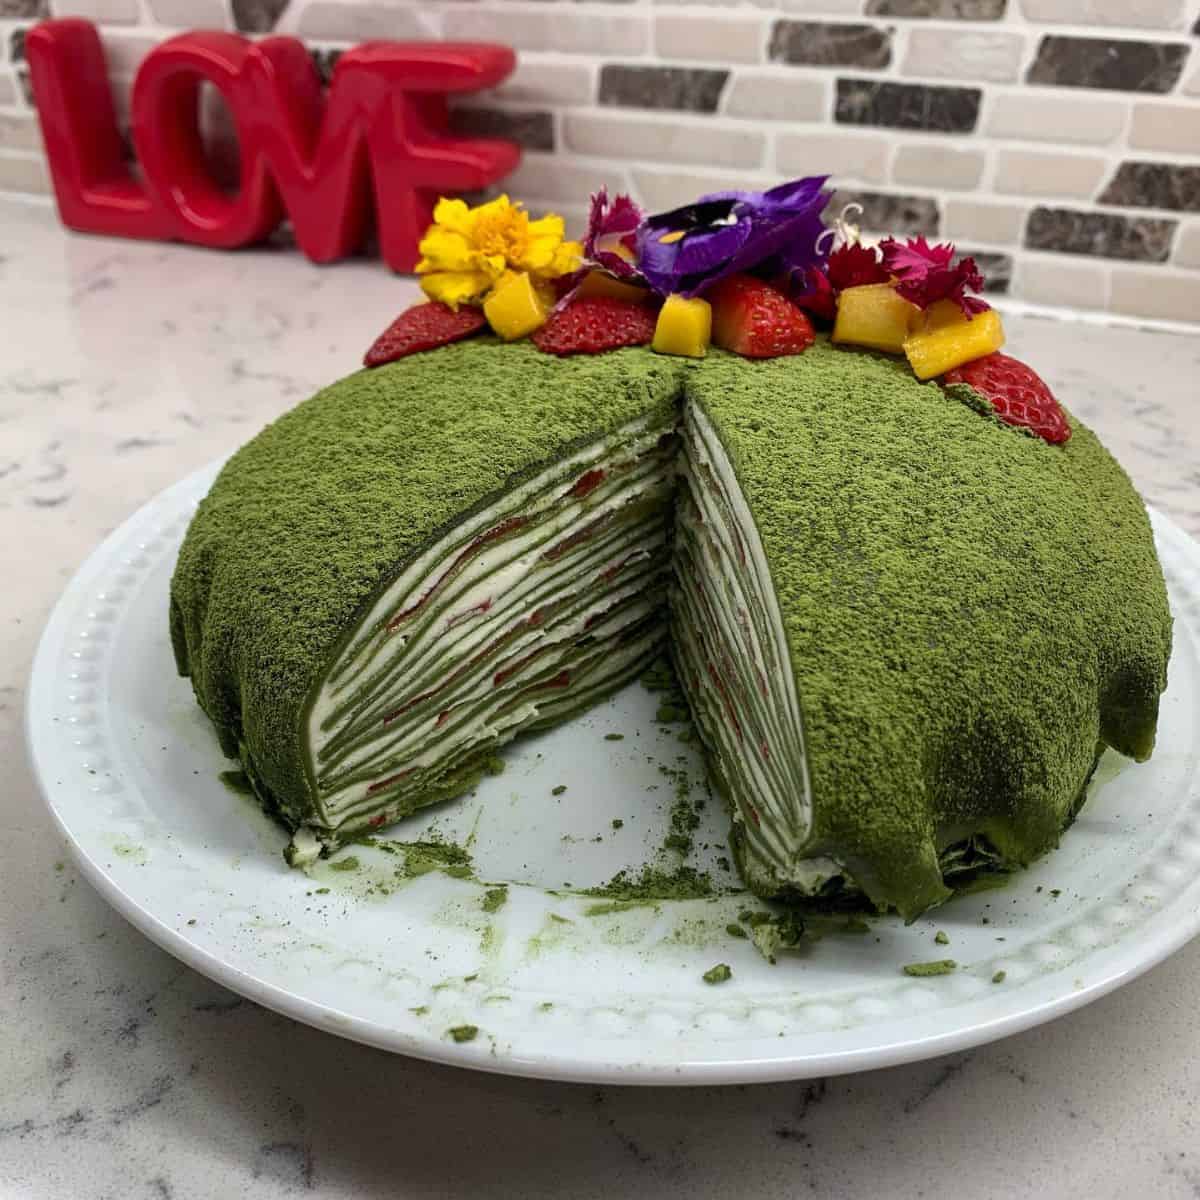 A Matcha Crepe Cake topped with fresh strawberries and edible flowers